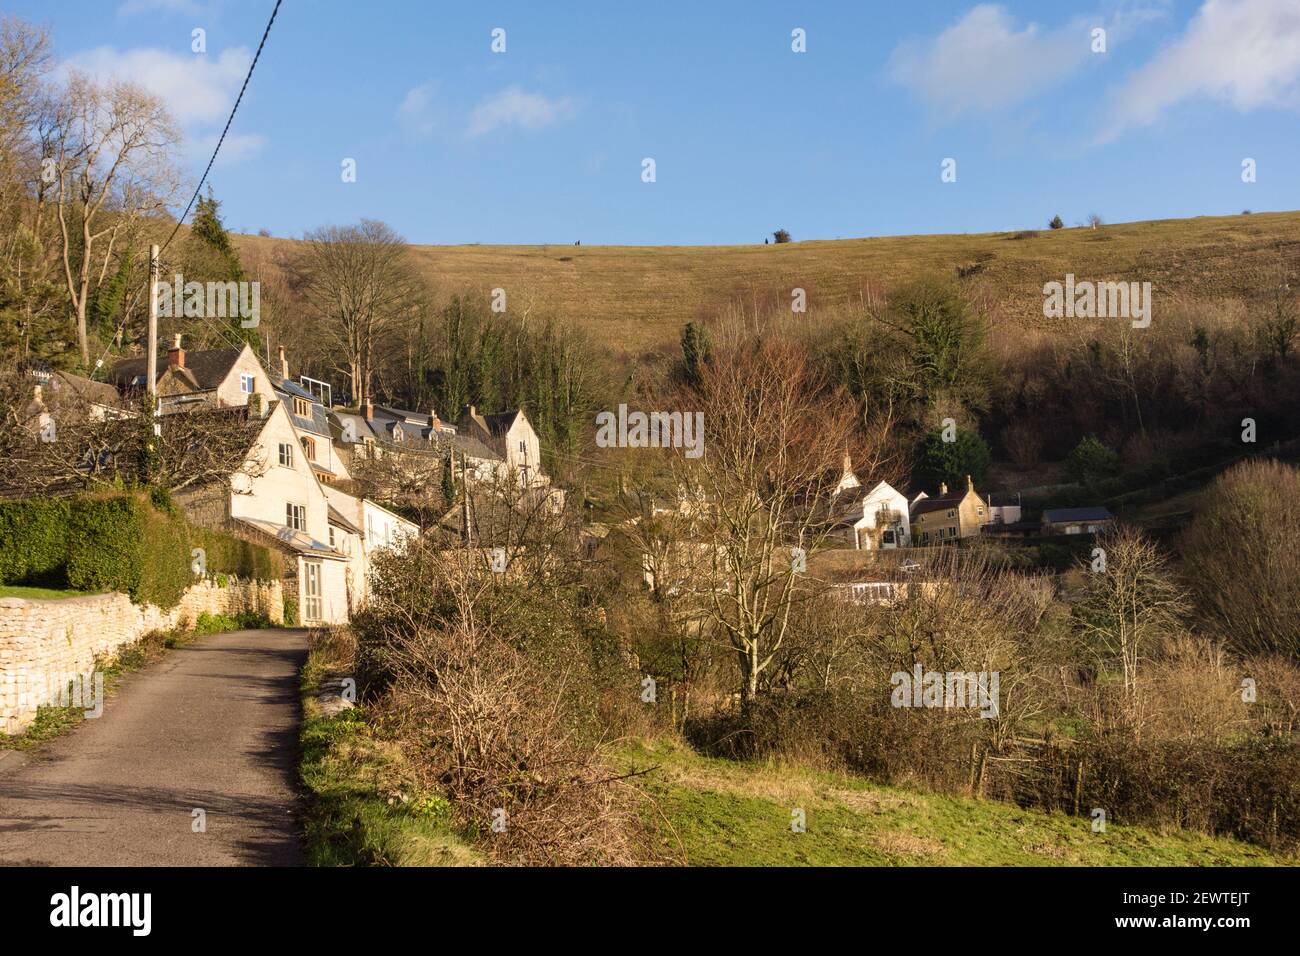 View of Kingscourt with Rodborough Common in background, Gloucestershire, UK Stock Photo